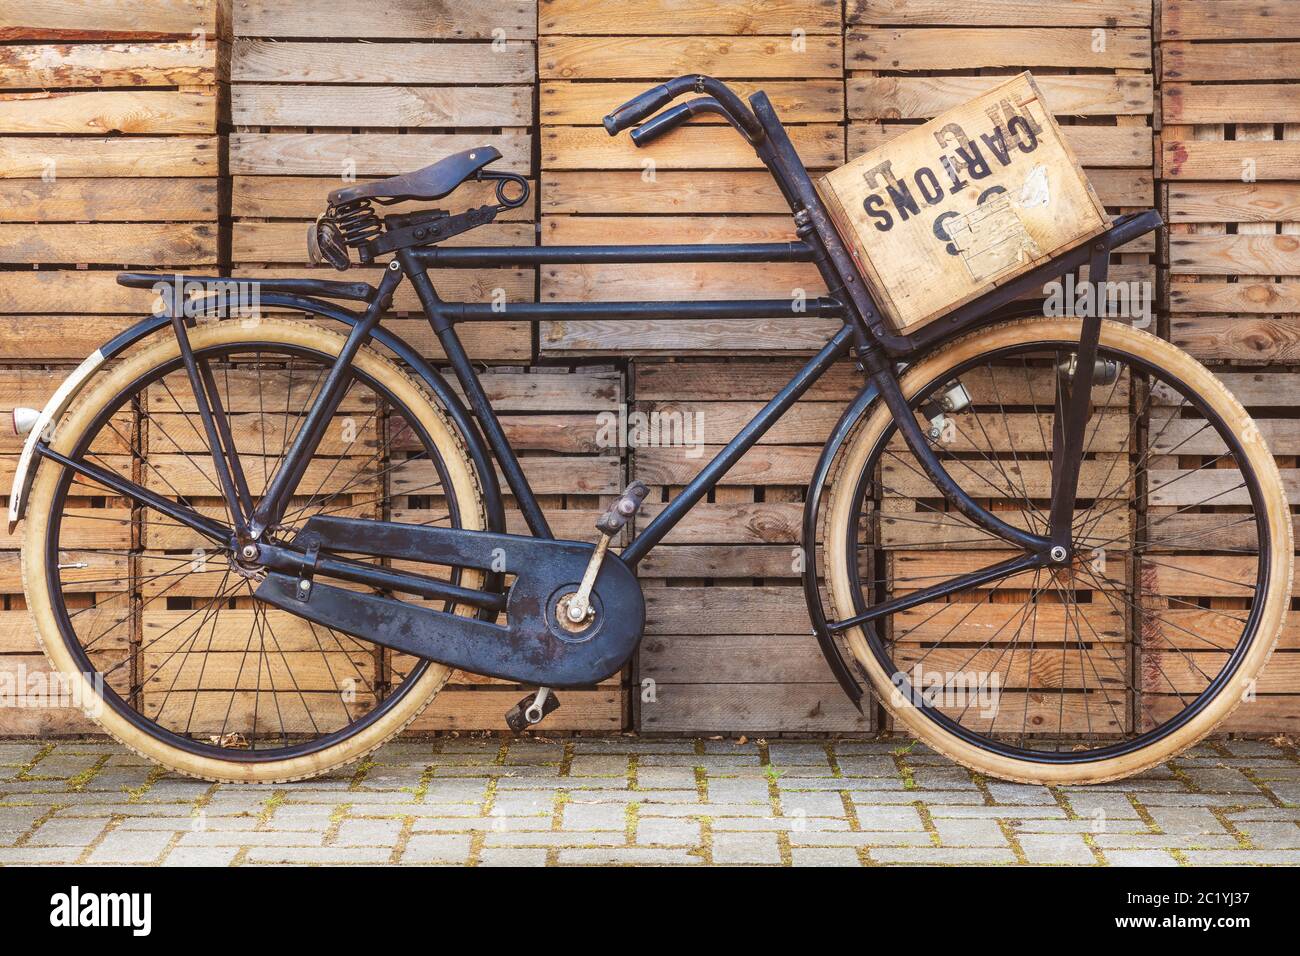 Vintage black cargo transport bicycle with crate carrier in front of old wooden crates Stock Photo